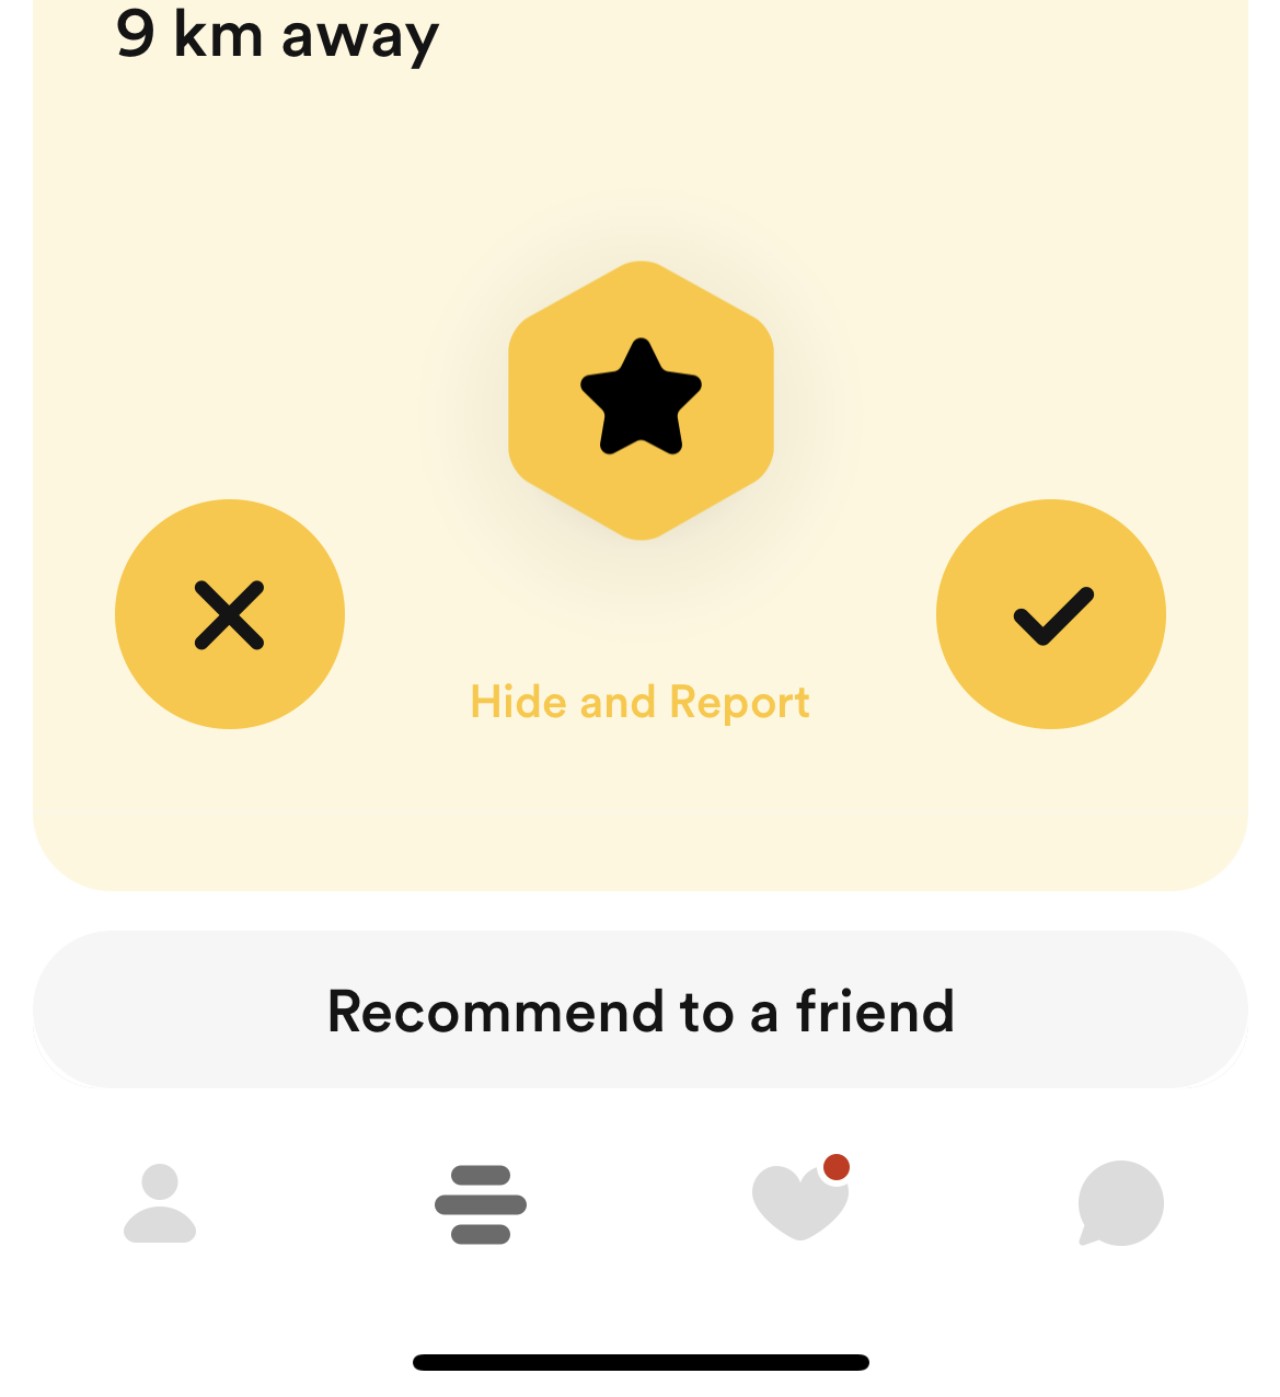 Still single? Bumble's 'Blind' Dating may be for you - GadgetMatch